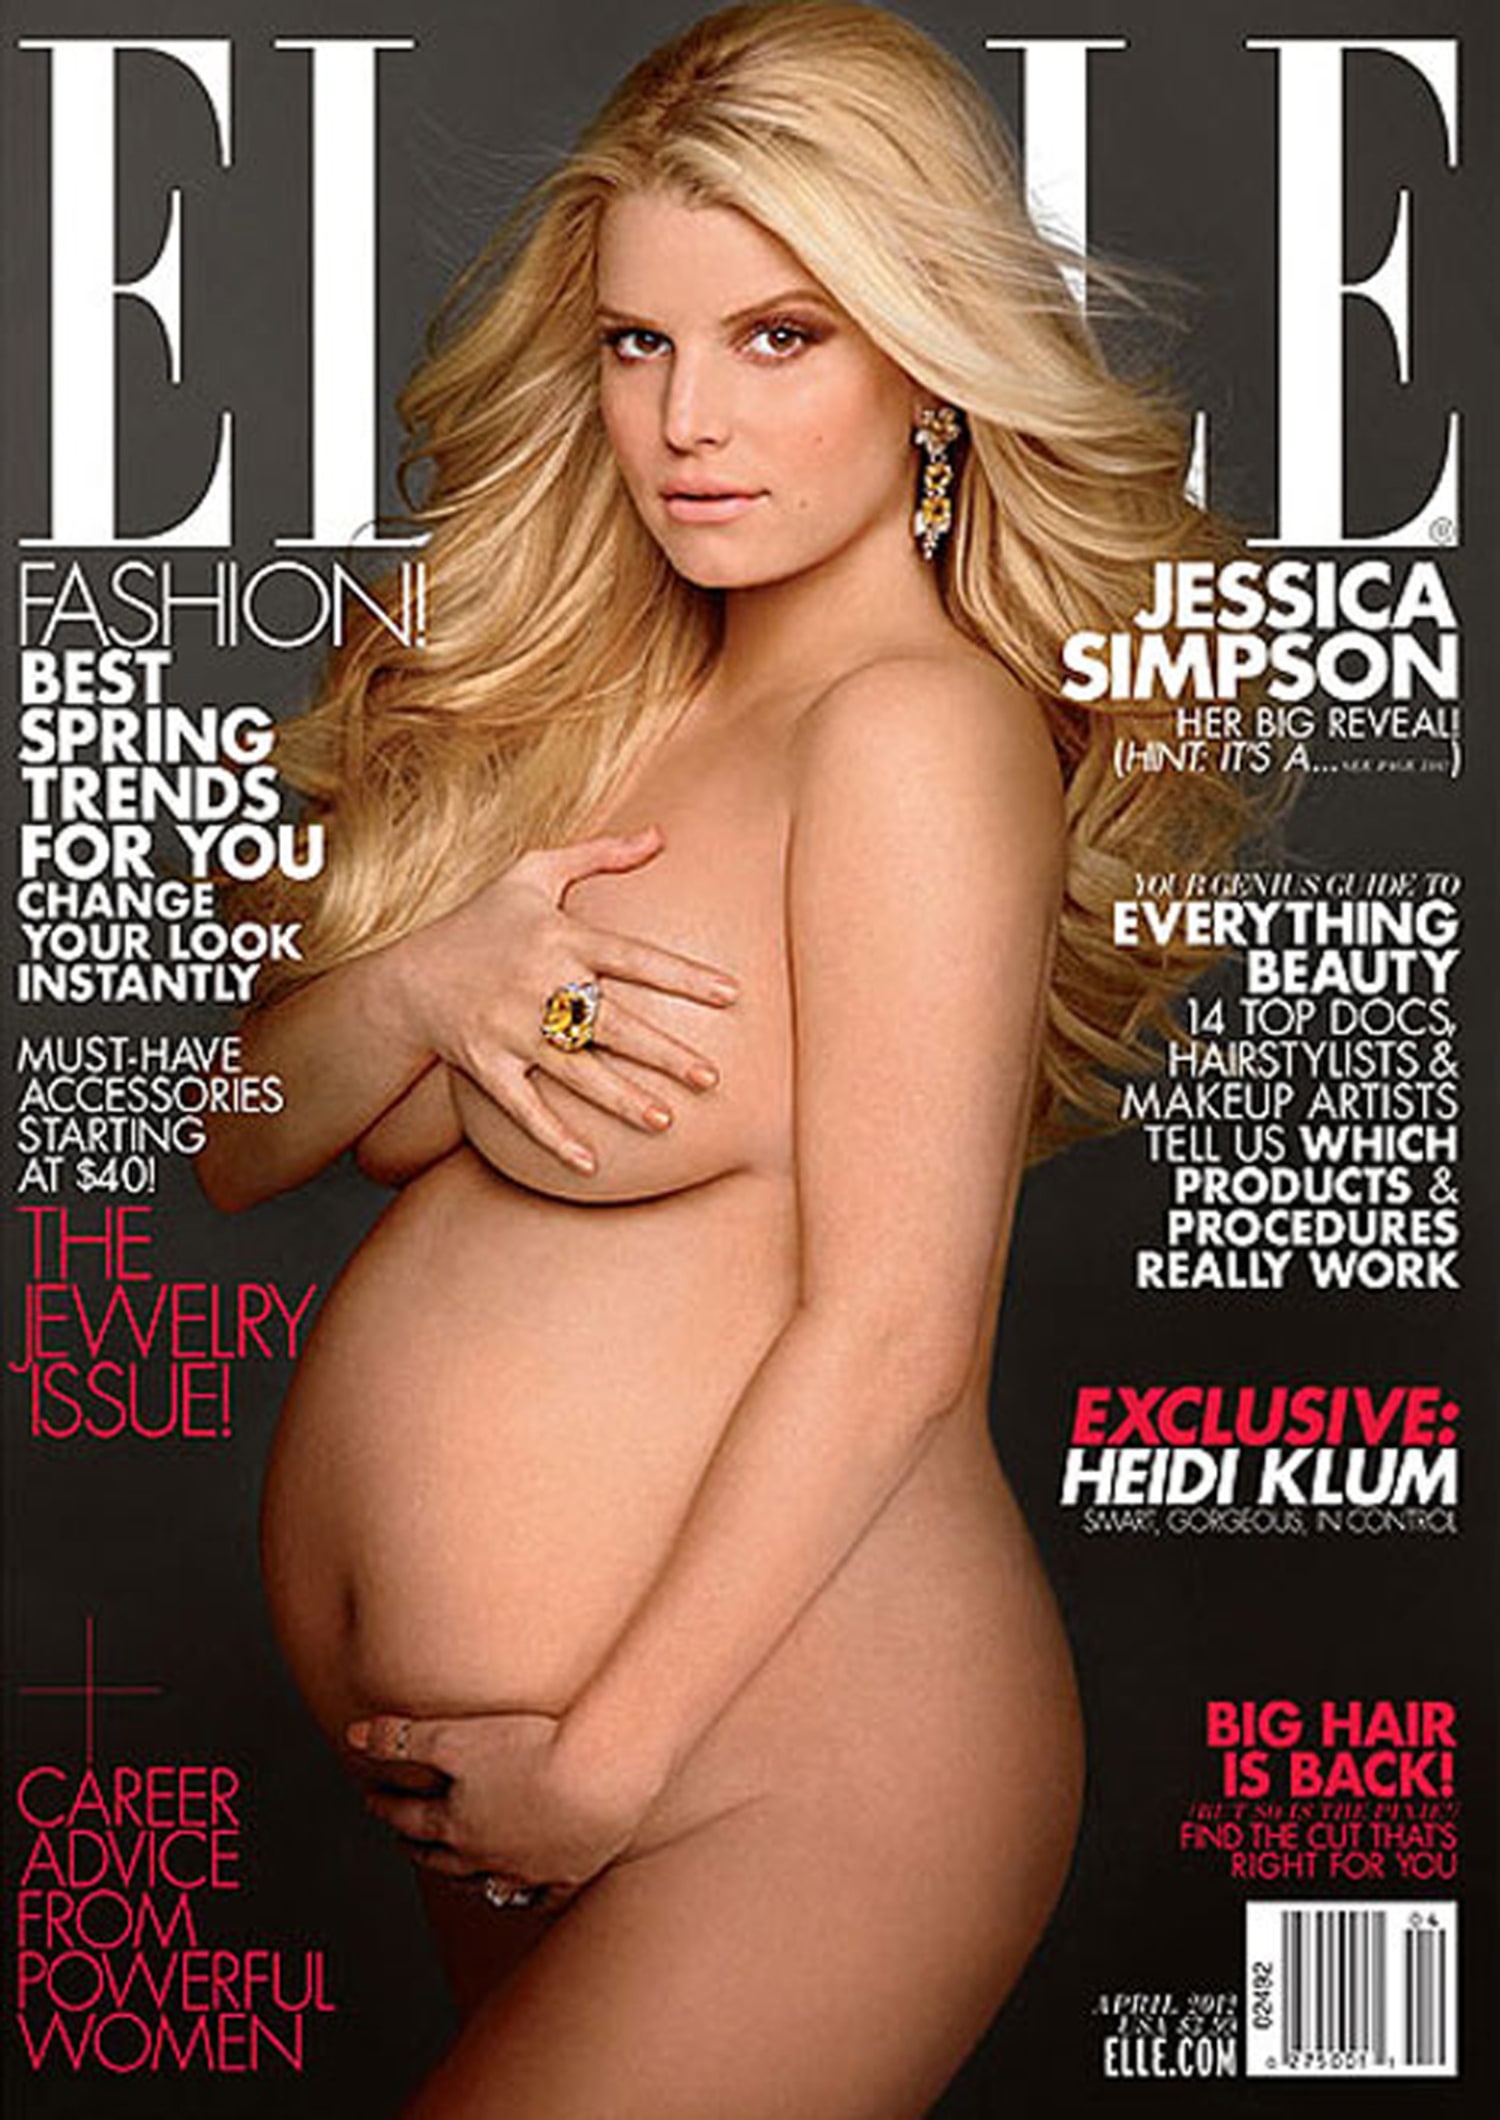 Naked images of jessica simpson